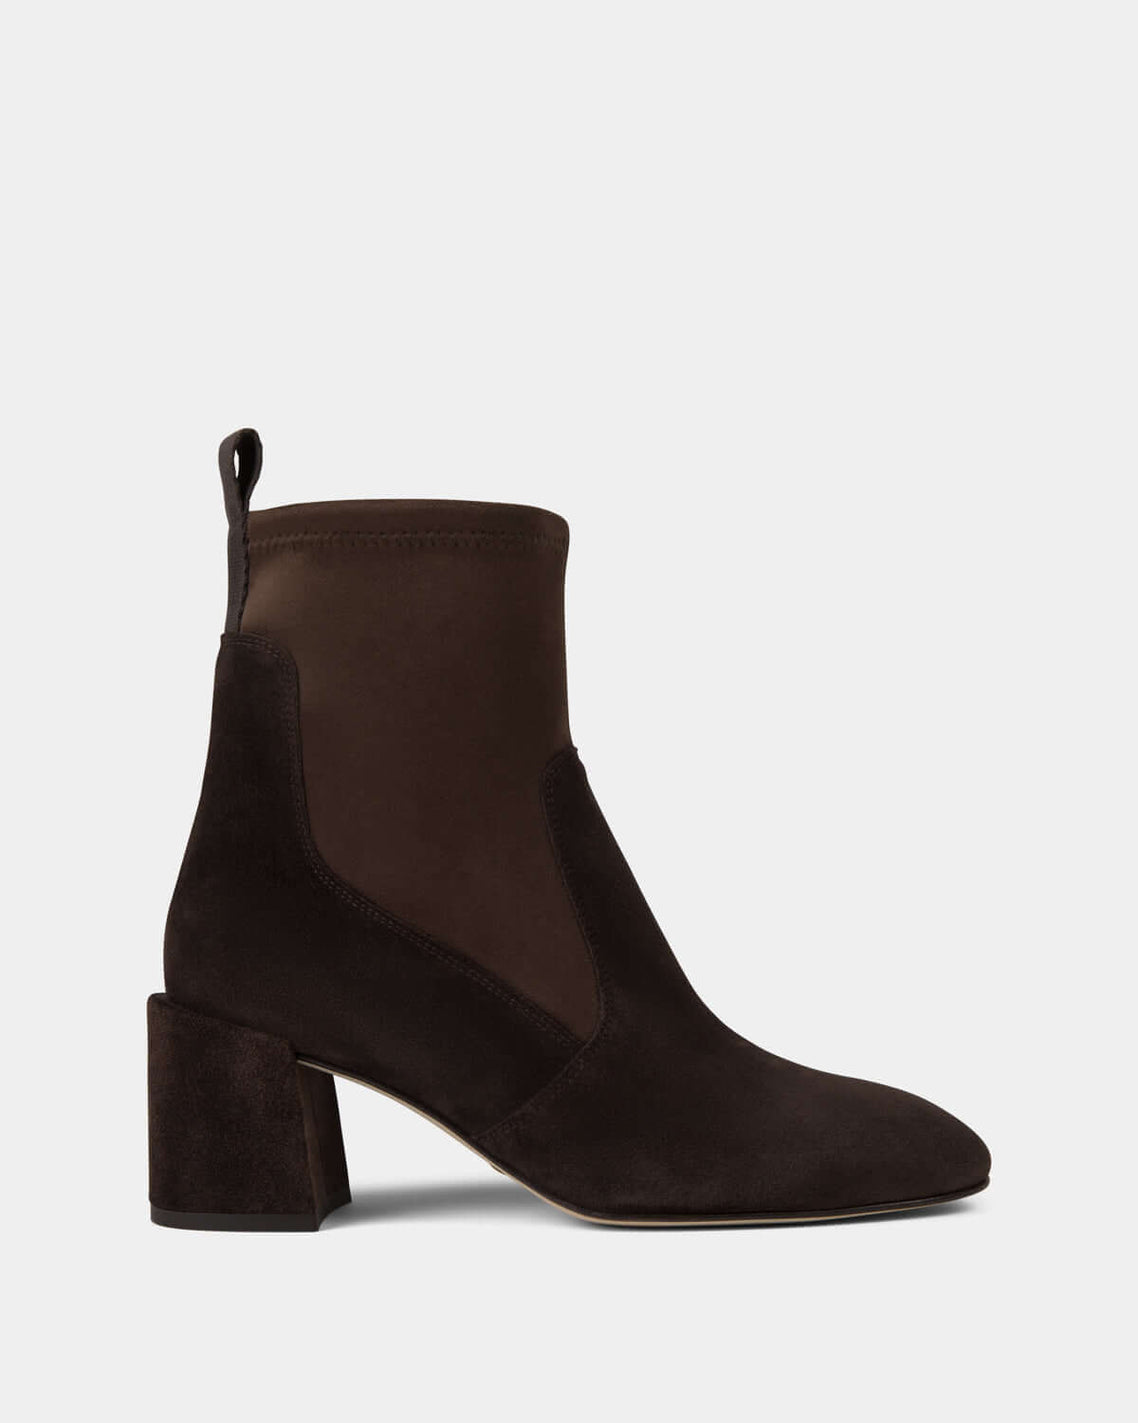 kallu-kallú-dark-brown-chocolate-suede-leather-shoes-for-women-made-in-spain-boots-ankle-boots-booties-low-cut-boots